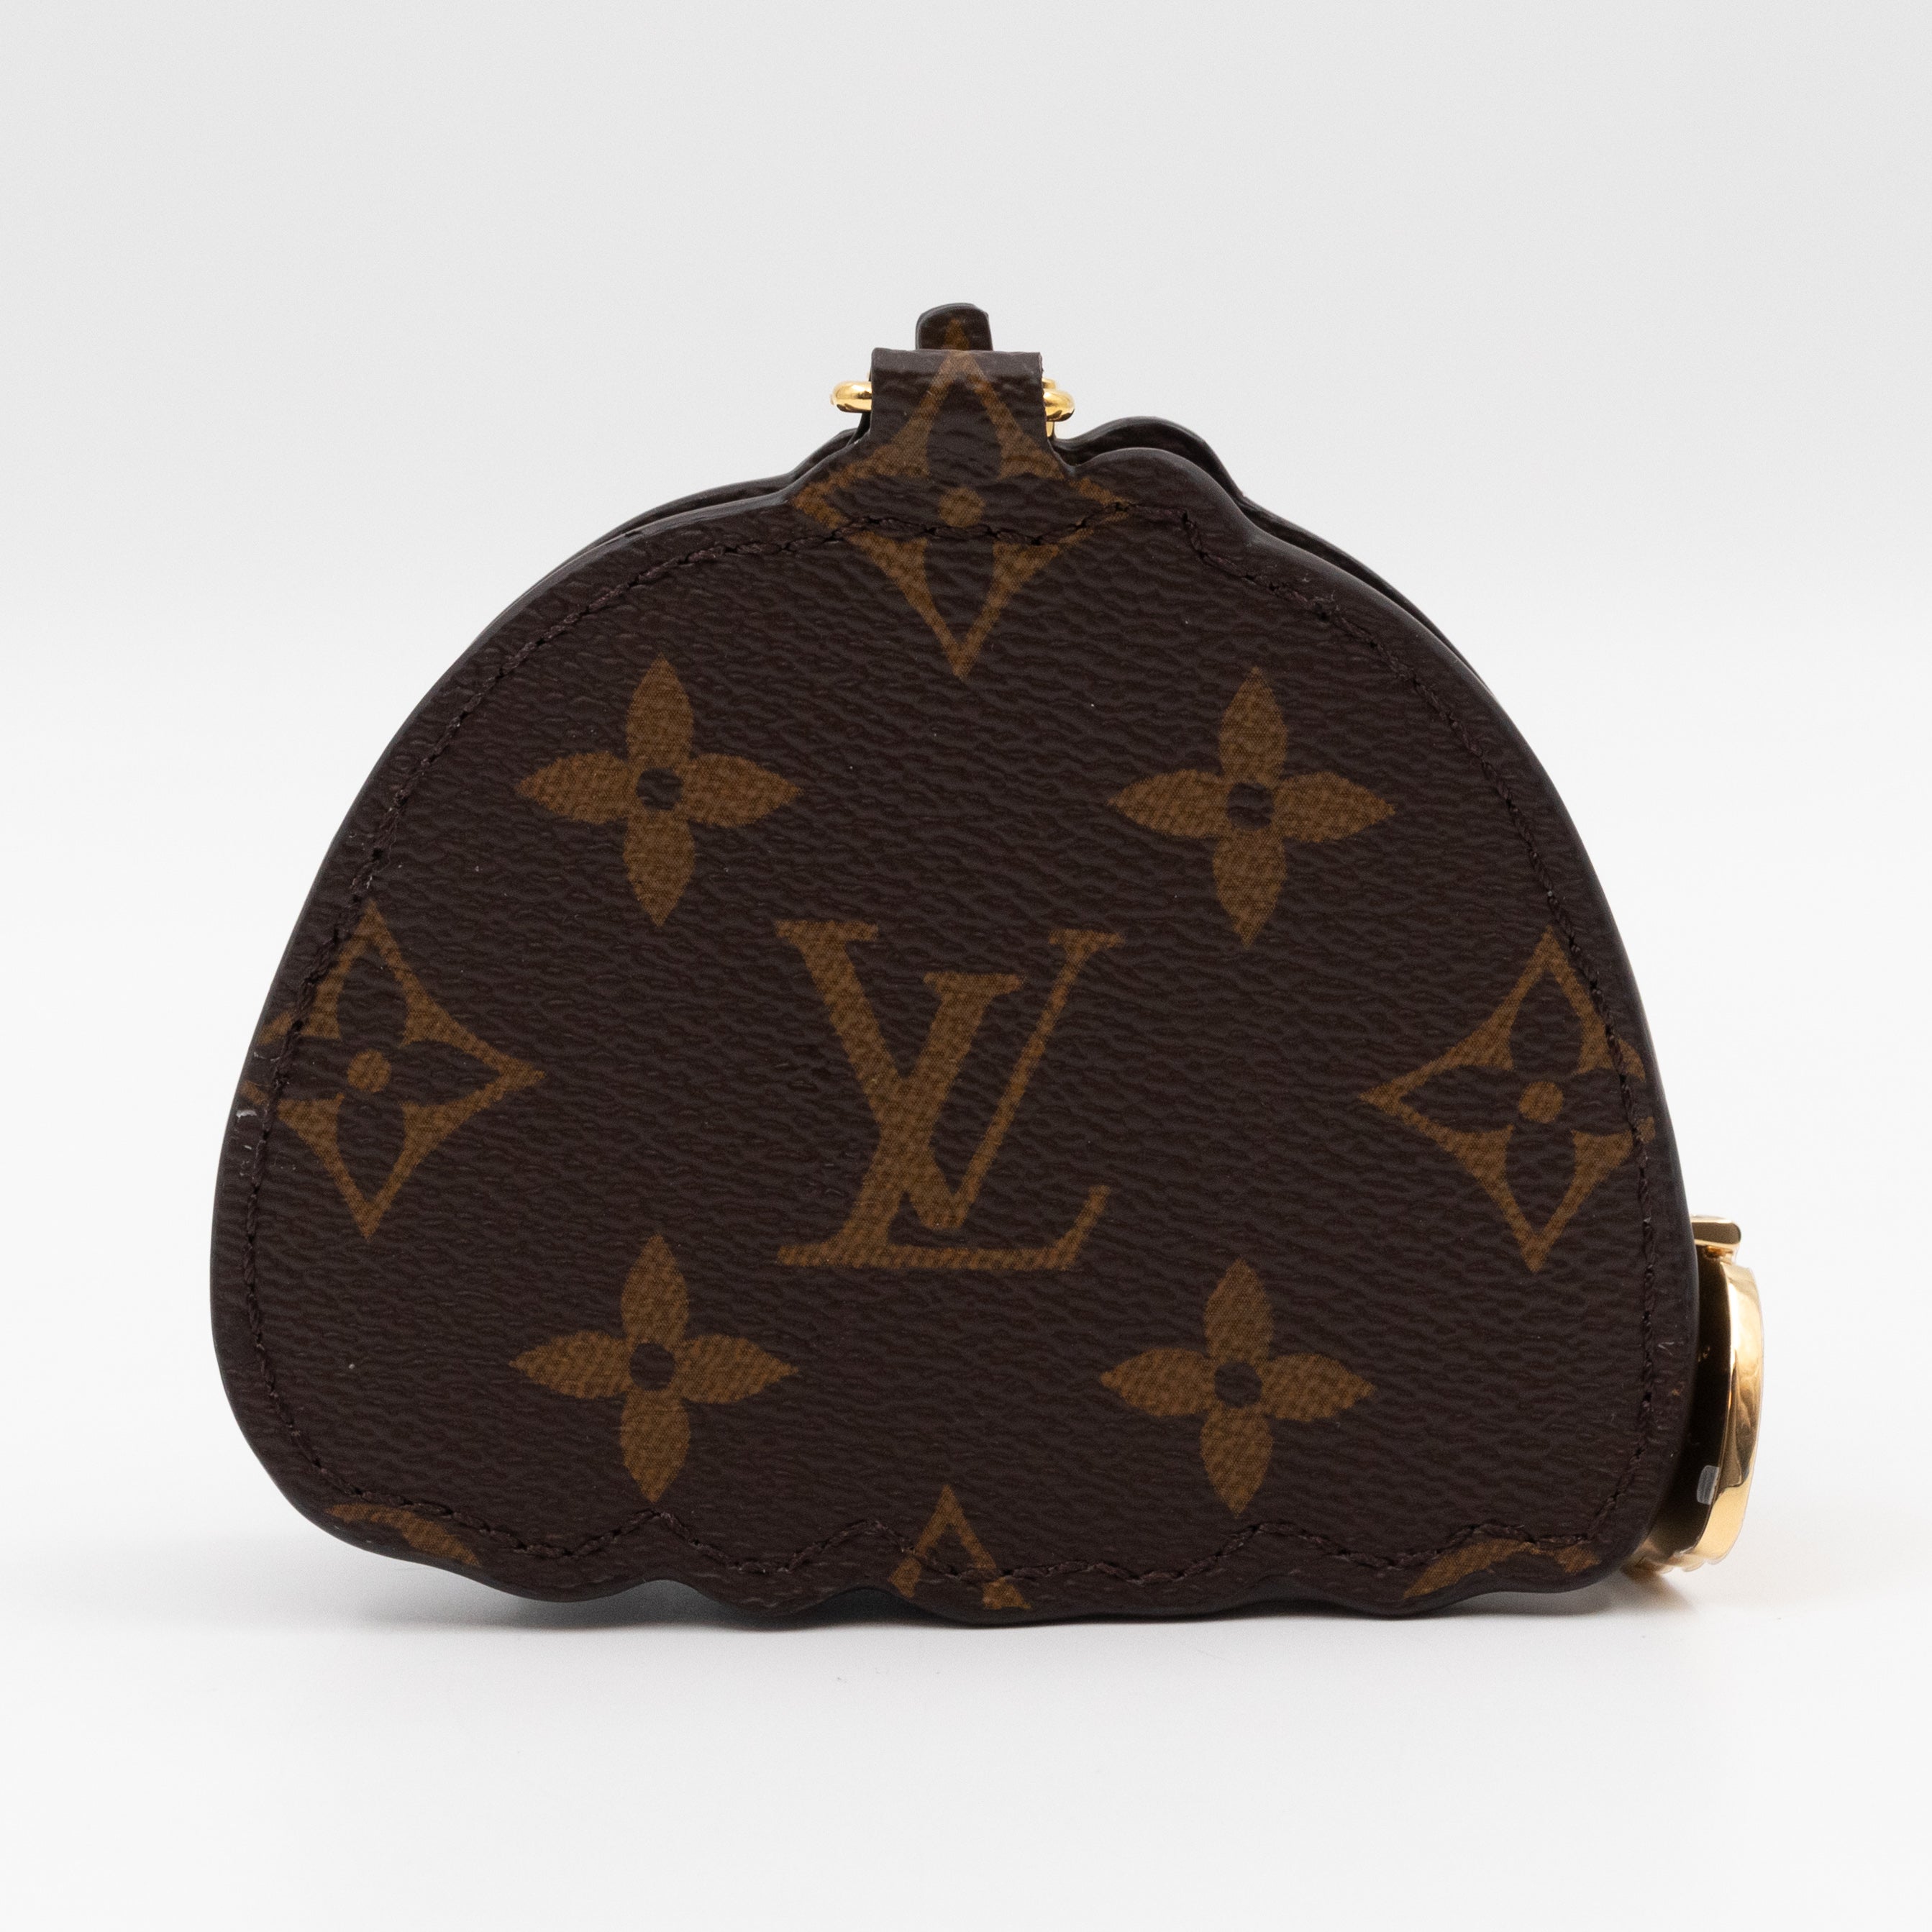 NEW LOUIS VUITTON COIN PURSE | FIRST IMPRESSIONS & WHAT FITS INSIDE -  YouTube